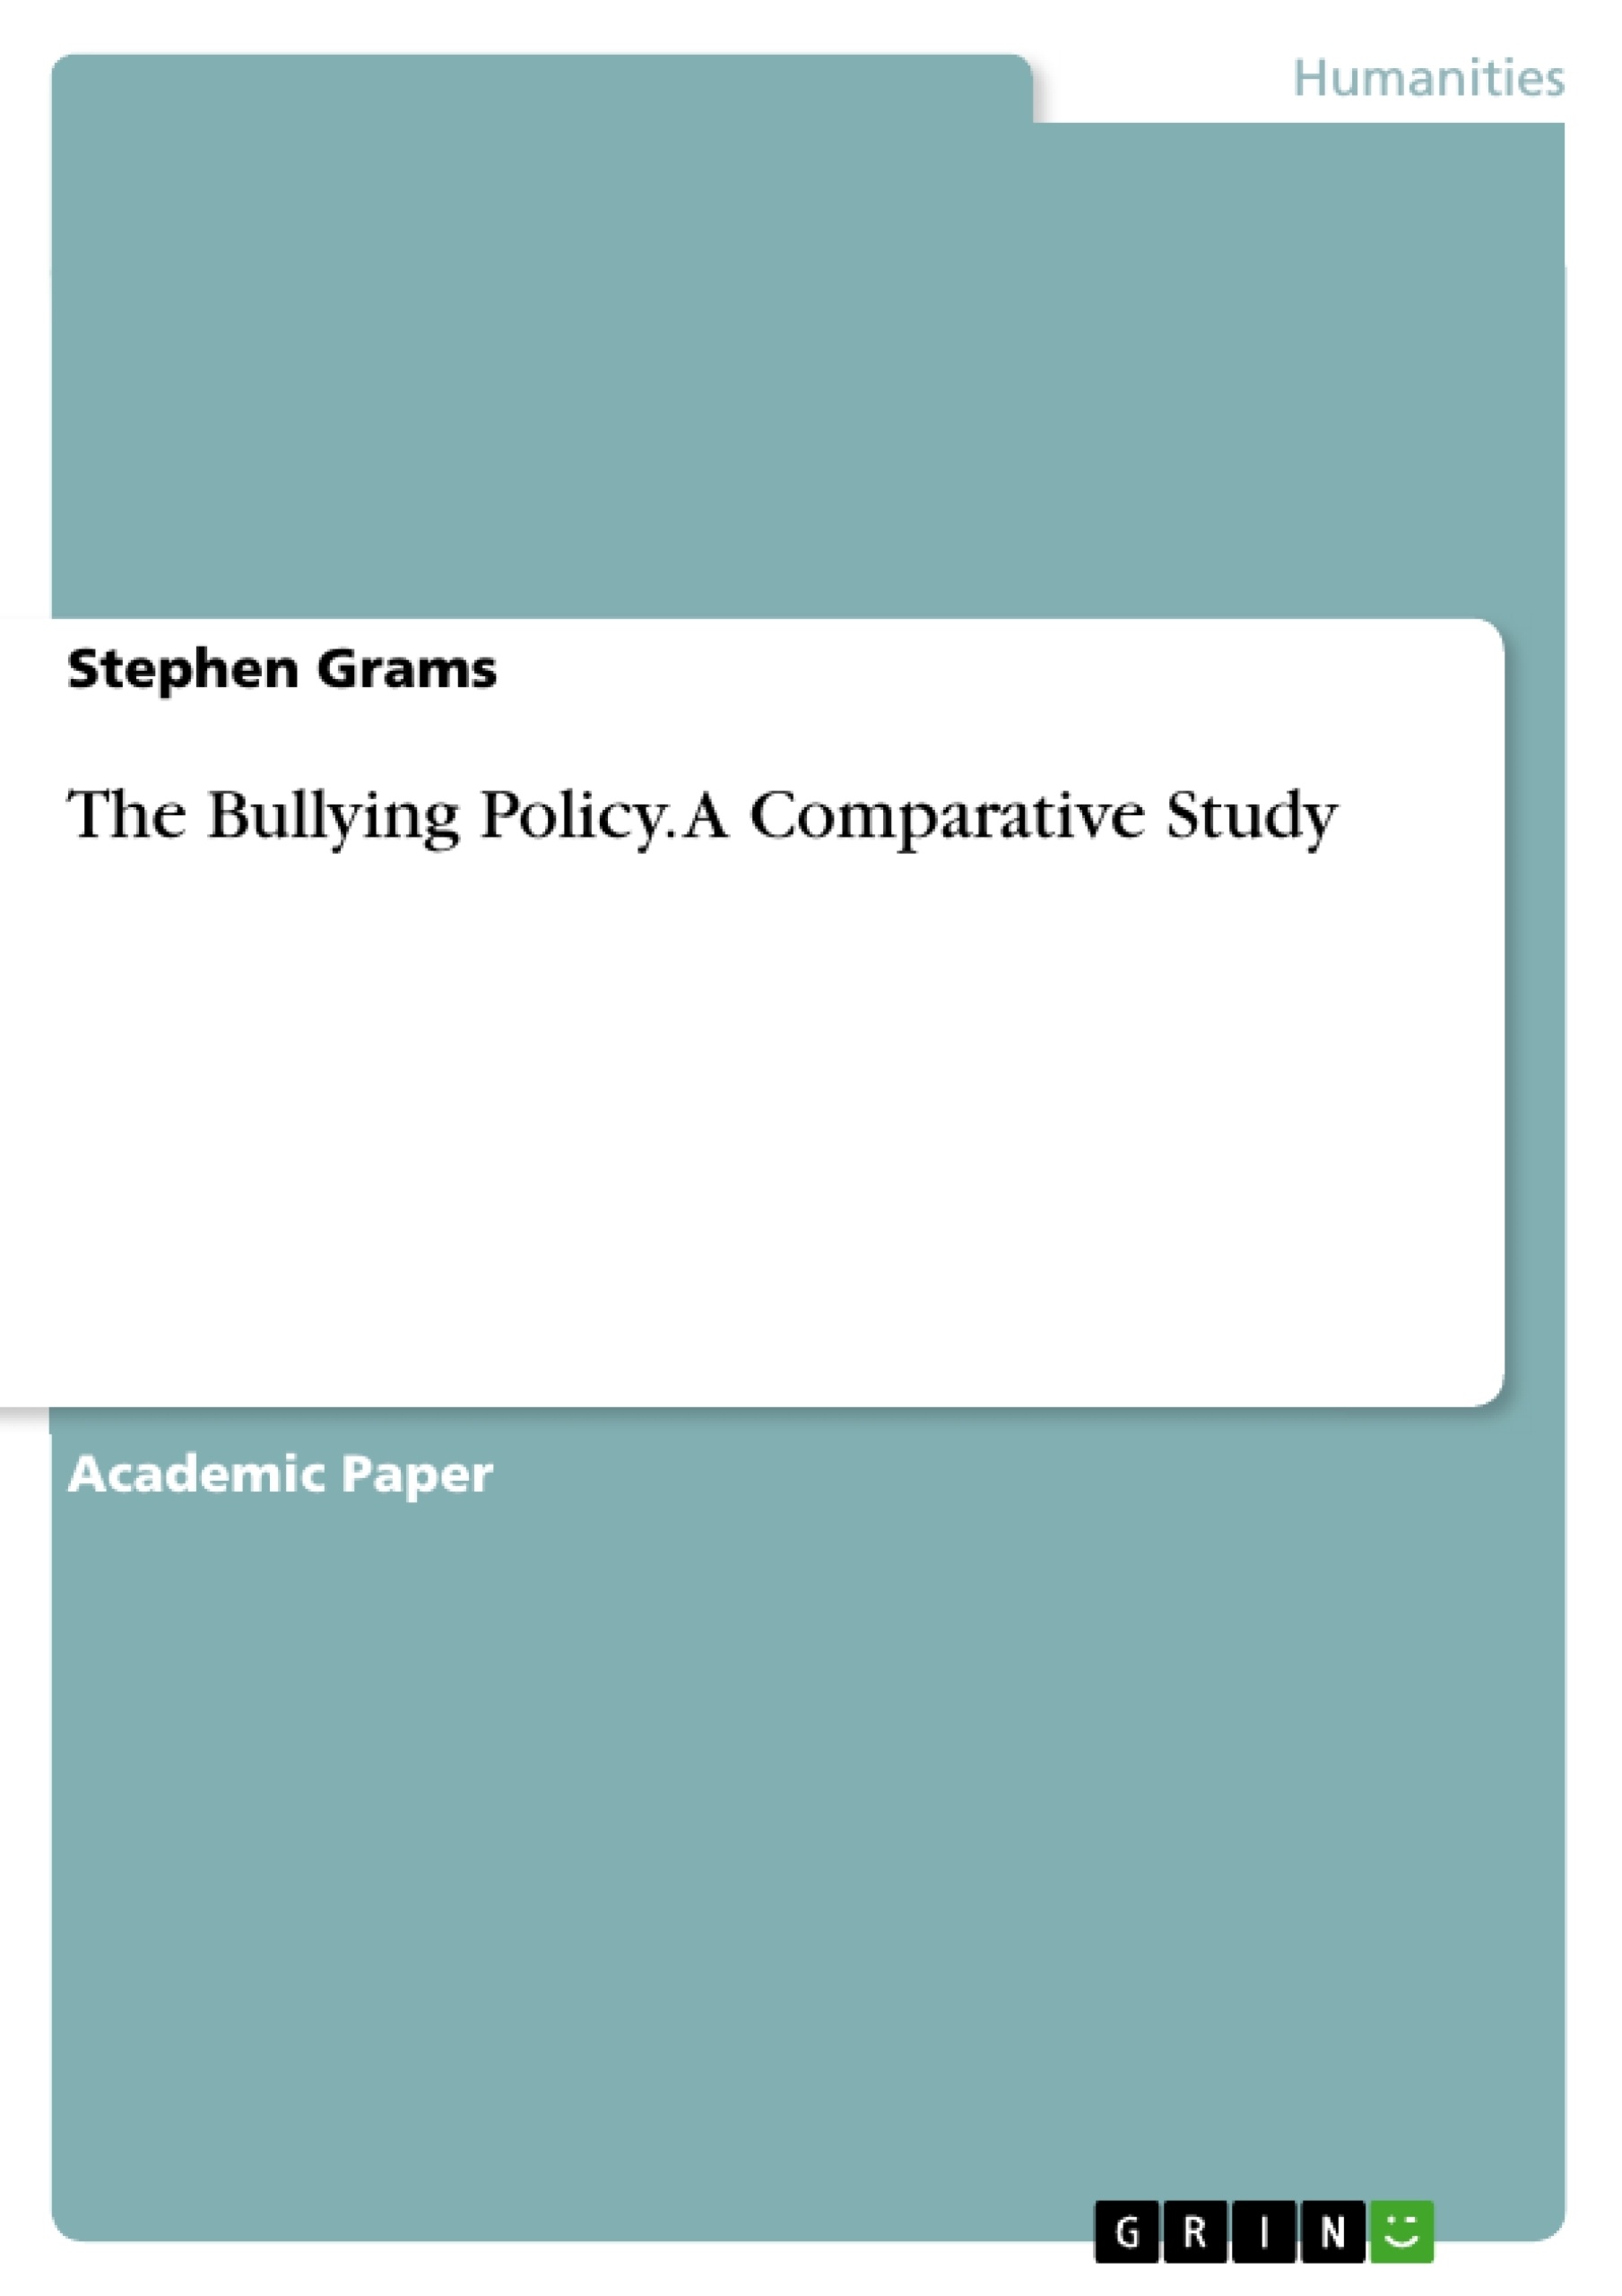 Title: The Bullying Policy. A Comparative Study